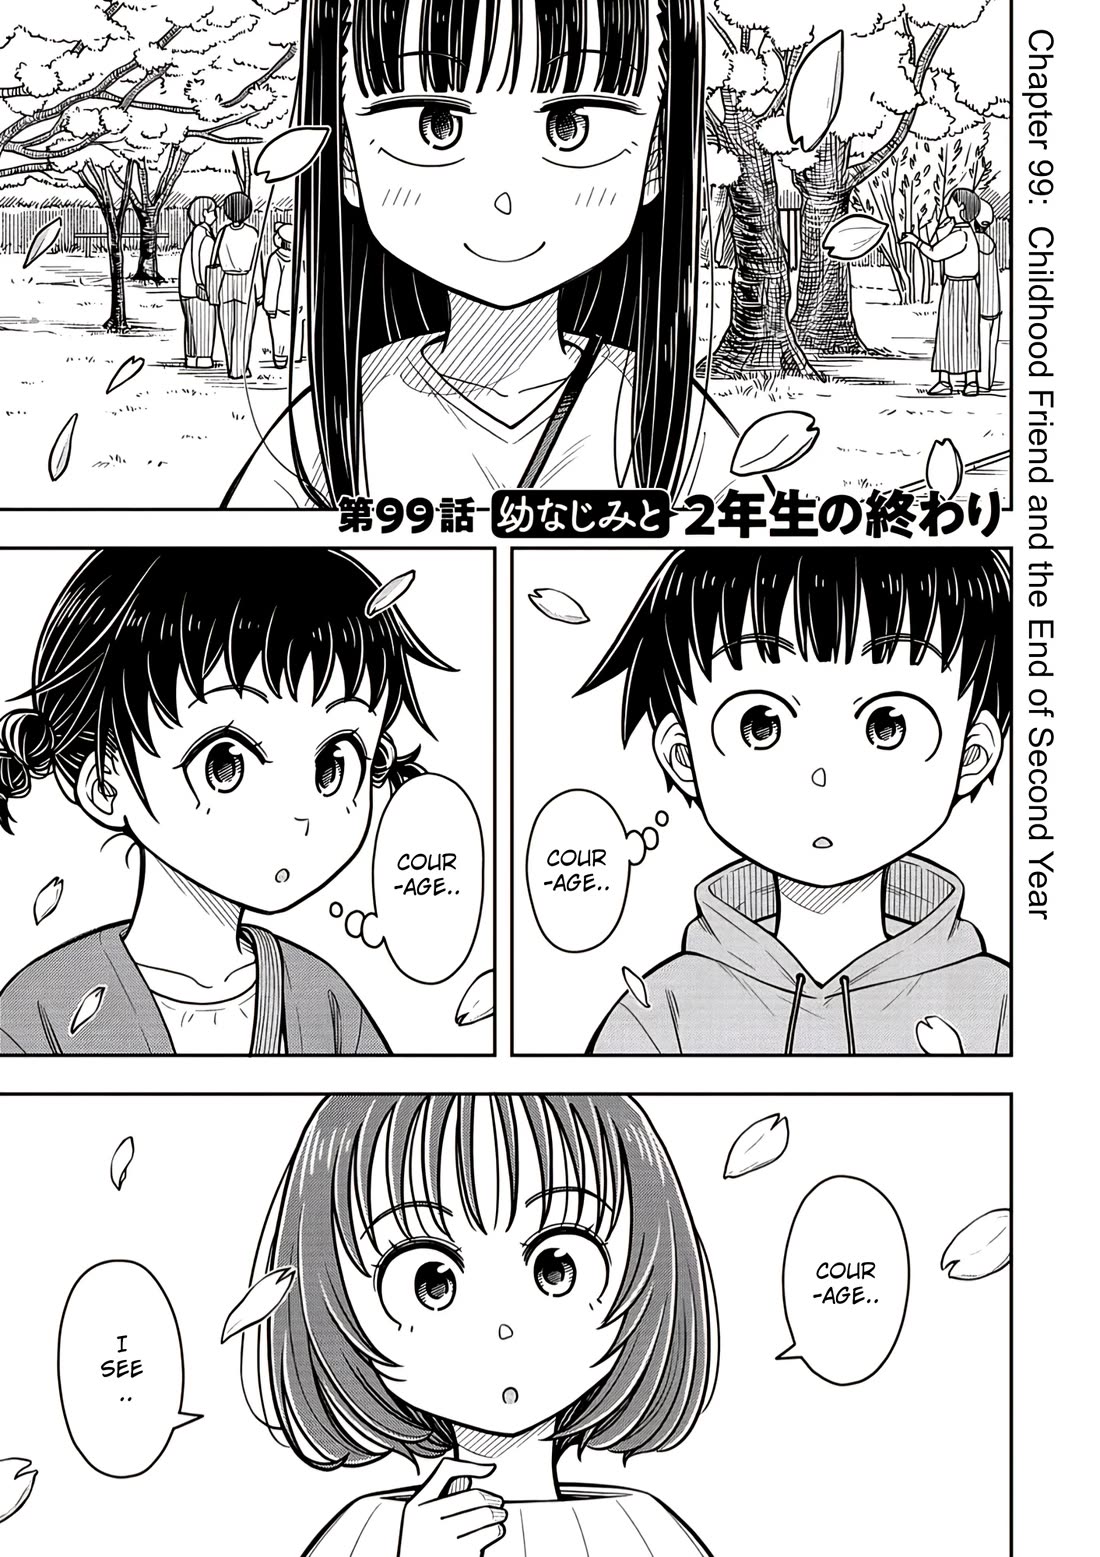 Starting Today She's My Childhood Friend - chapter 99 - #1